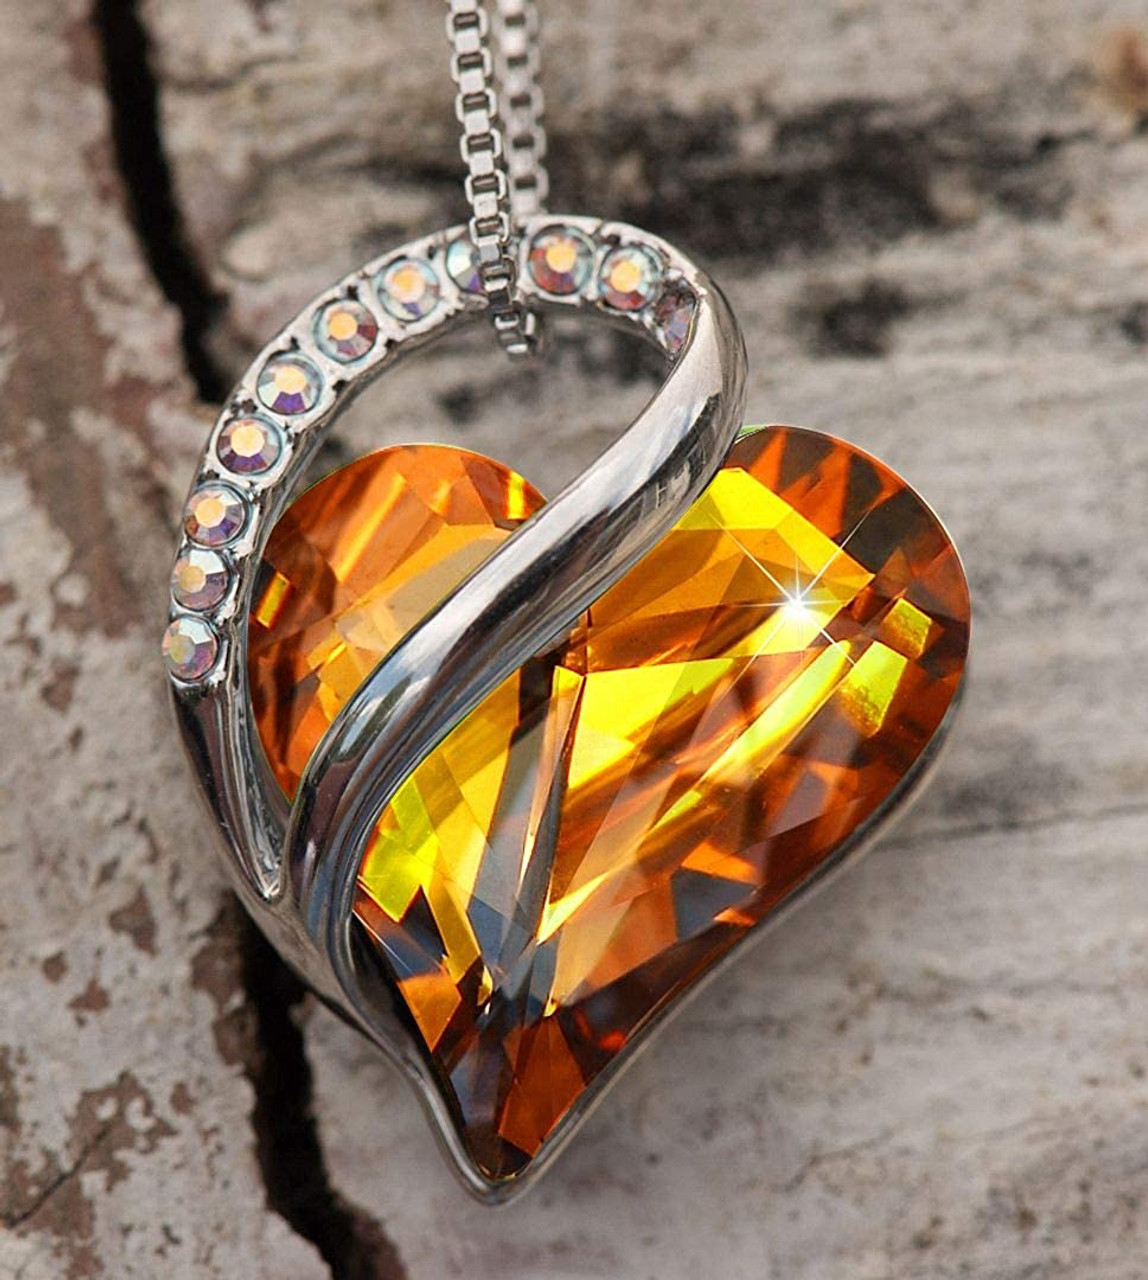 November Birthstone - Light Brown - Amber Looped Heart Design Crystal Pendant and CZ stones - with 18" Chain Necklace. Gift for Lover, Girl Friend, Wife, Valentine's Day Gift, Mother's Day, Anniversary Gift Heart Necklace.